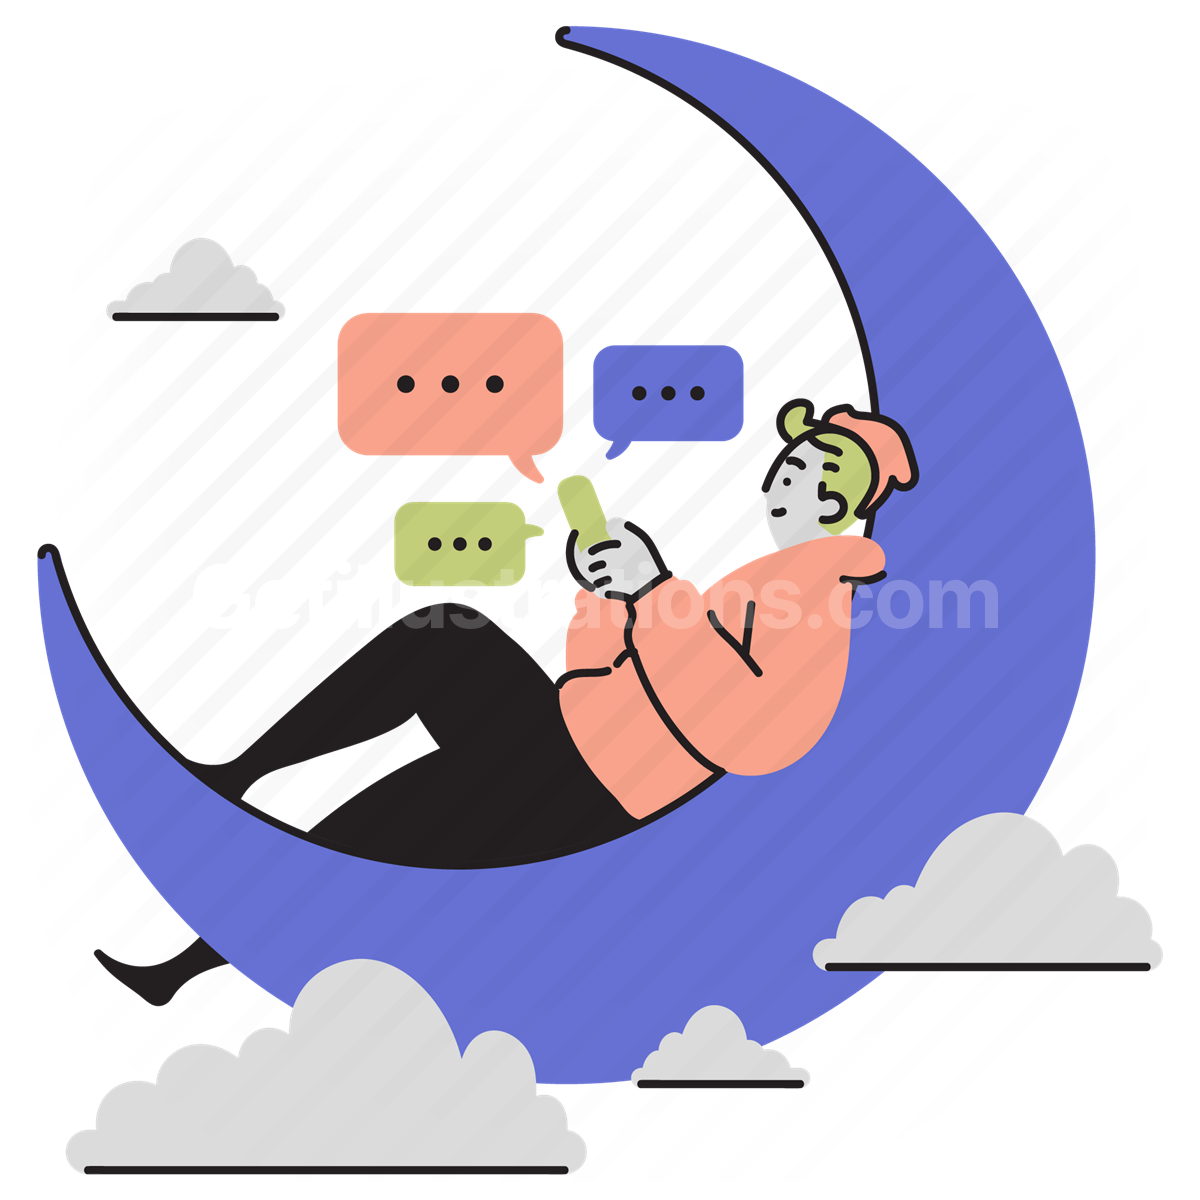 messaging, message, night, moon, man, chat, talk, late night, clouds